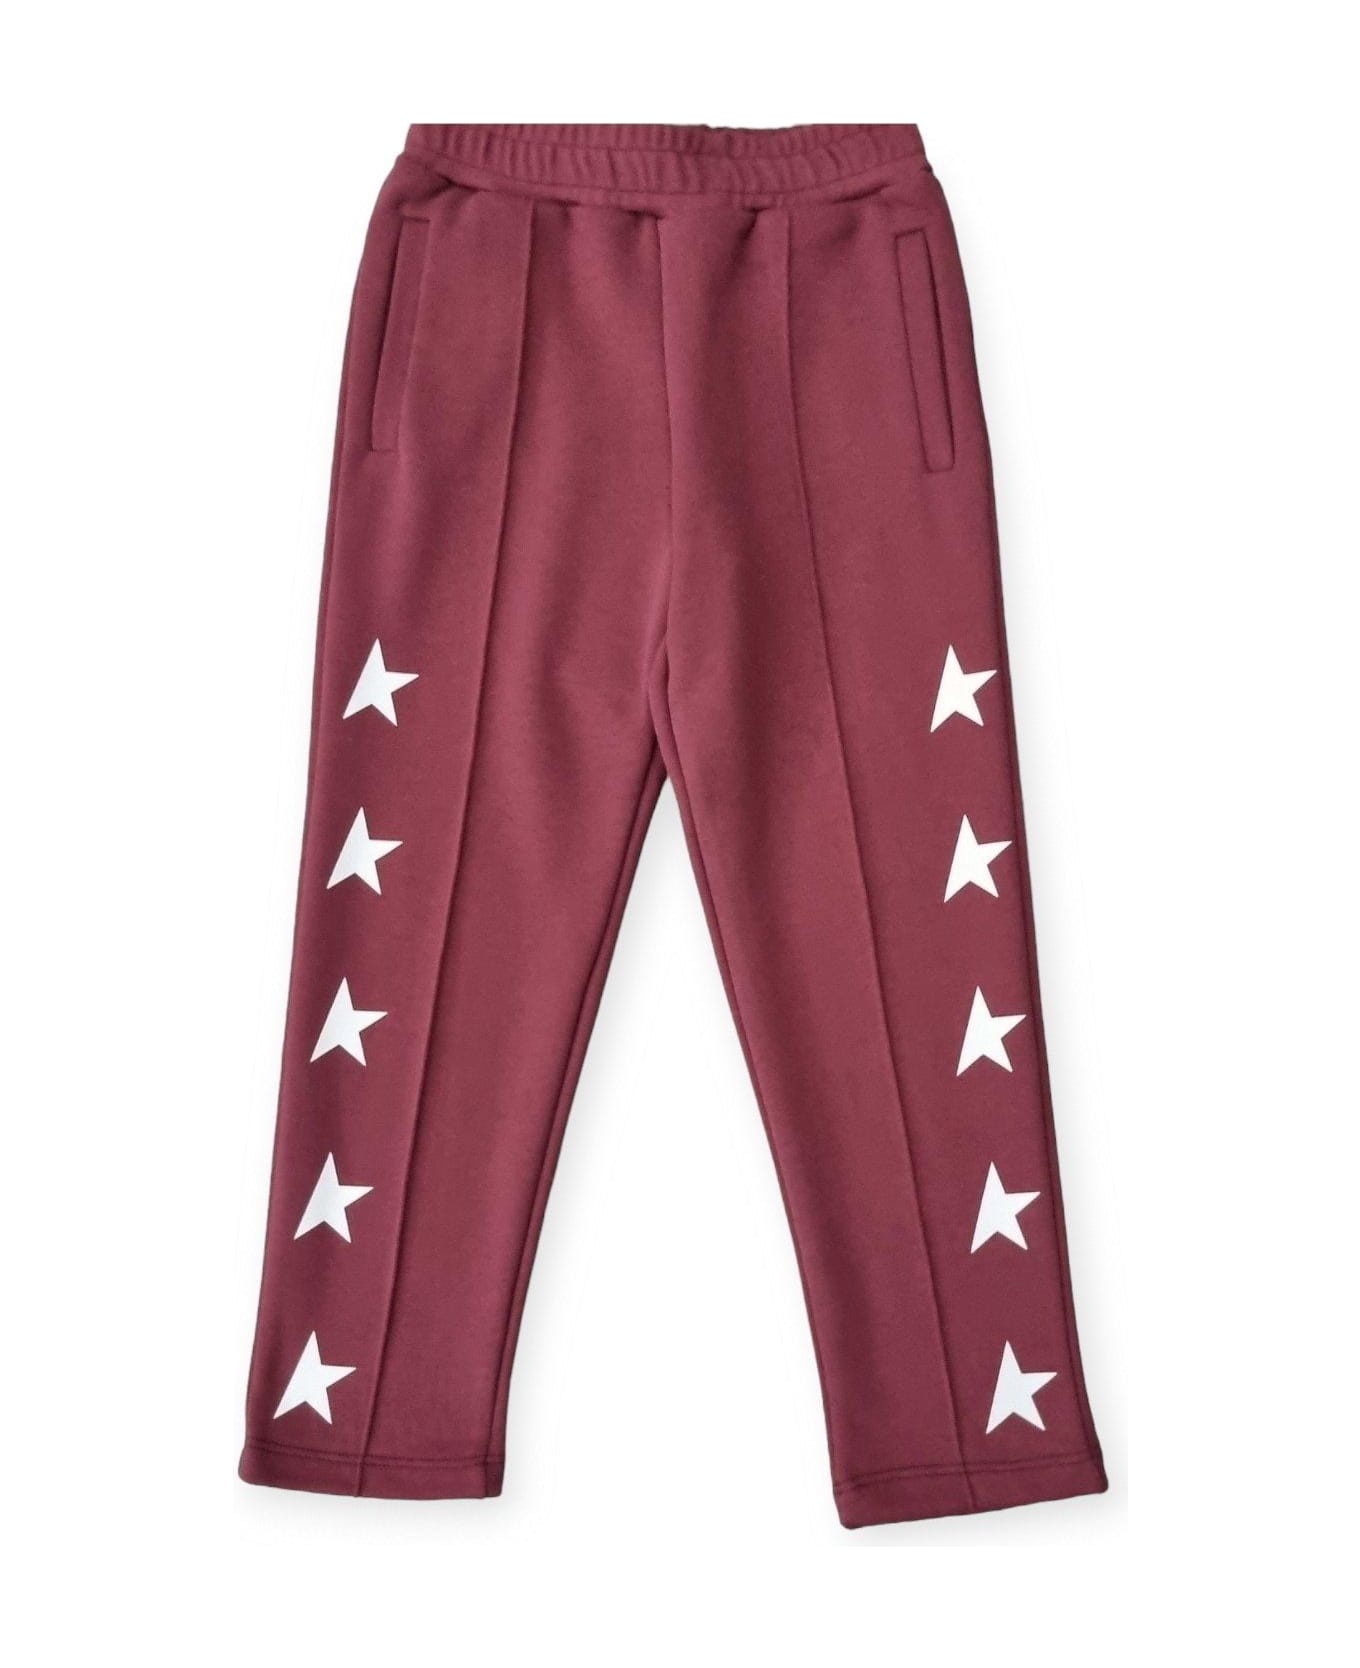 Golden Goose Star Printed Joggers - WINDSOR WINE  ボトムス